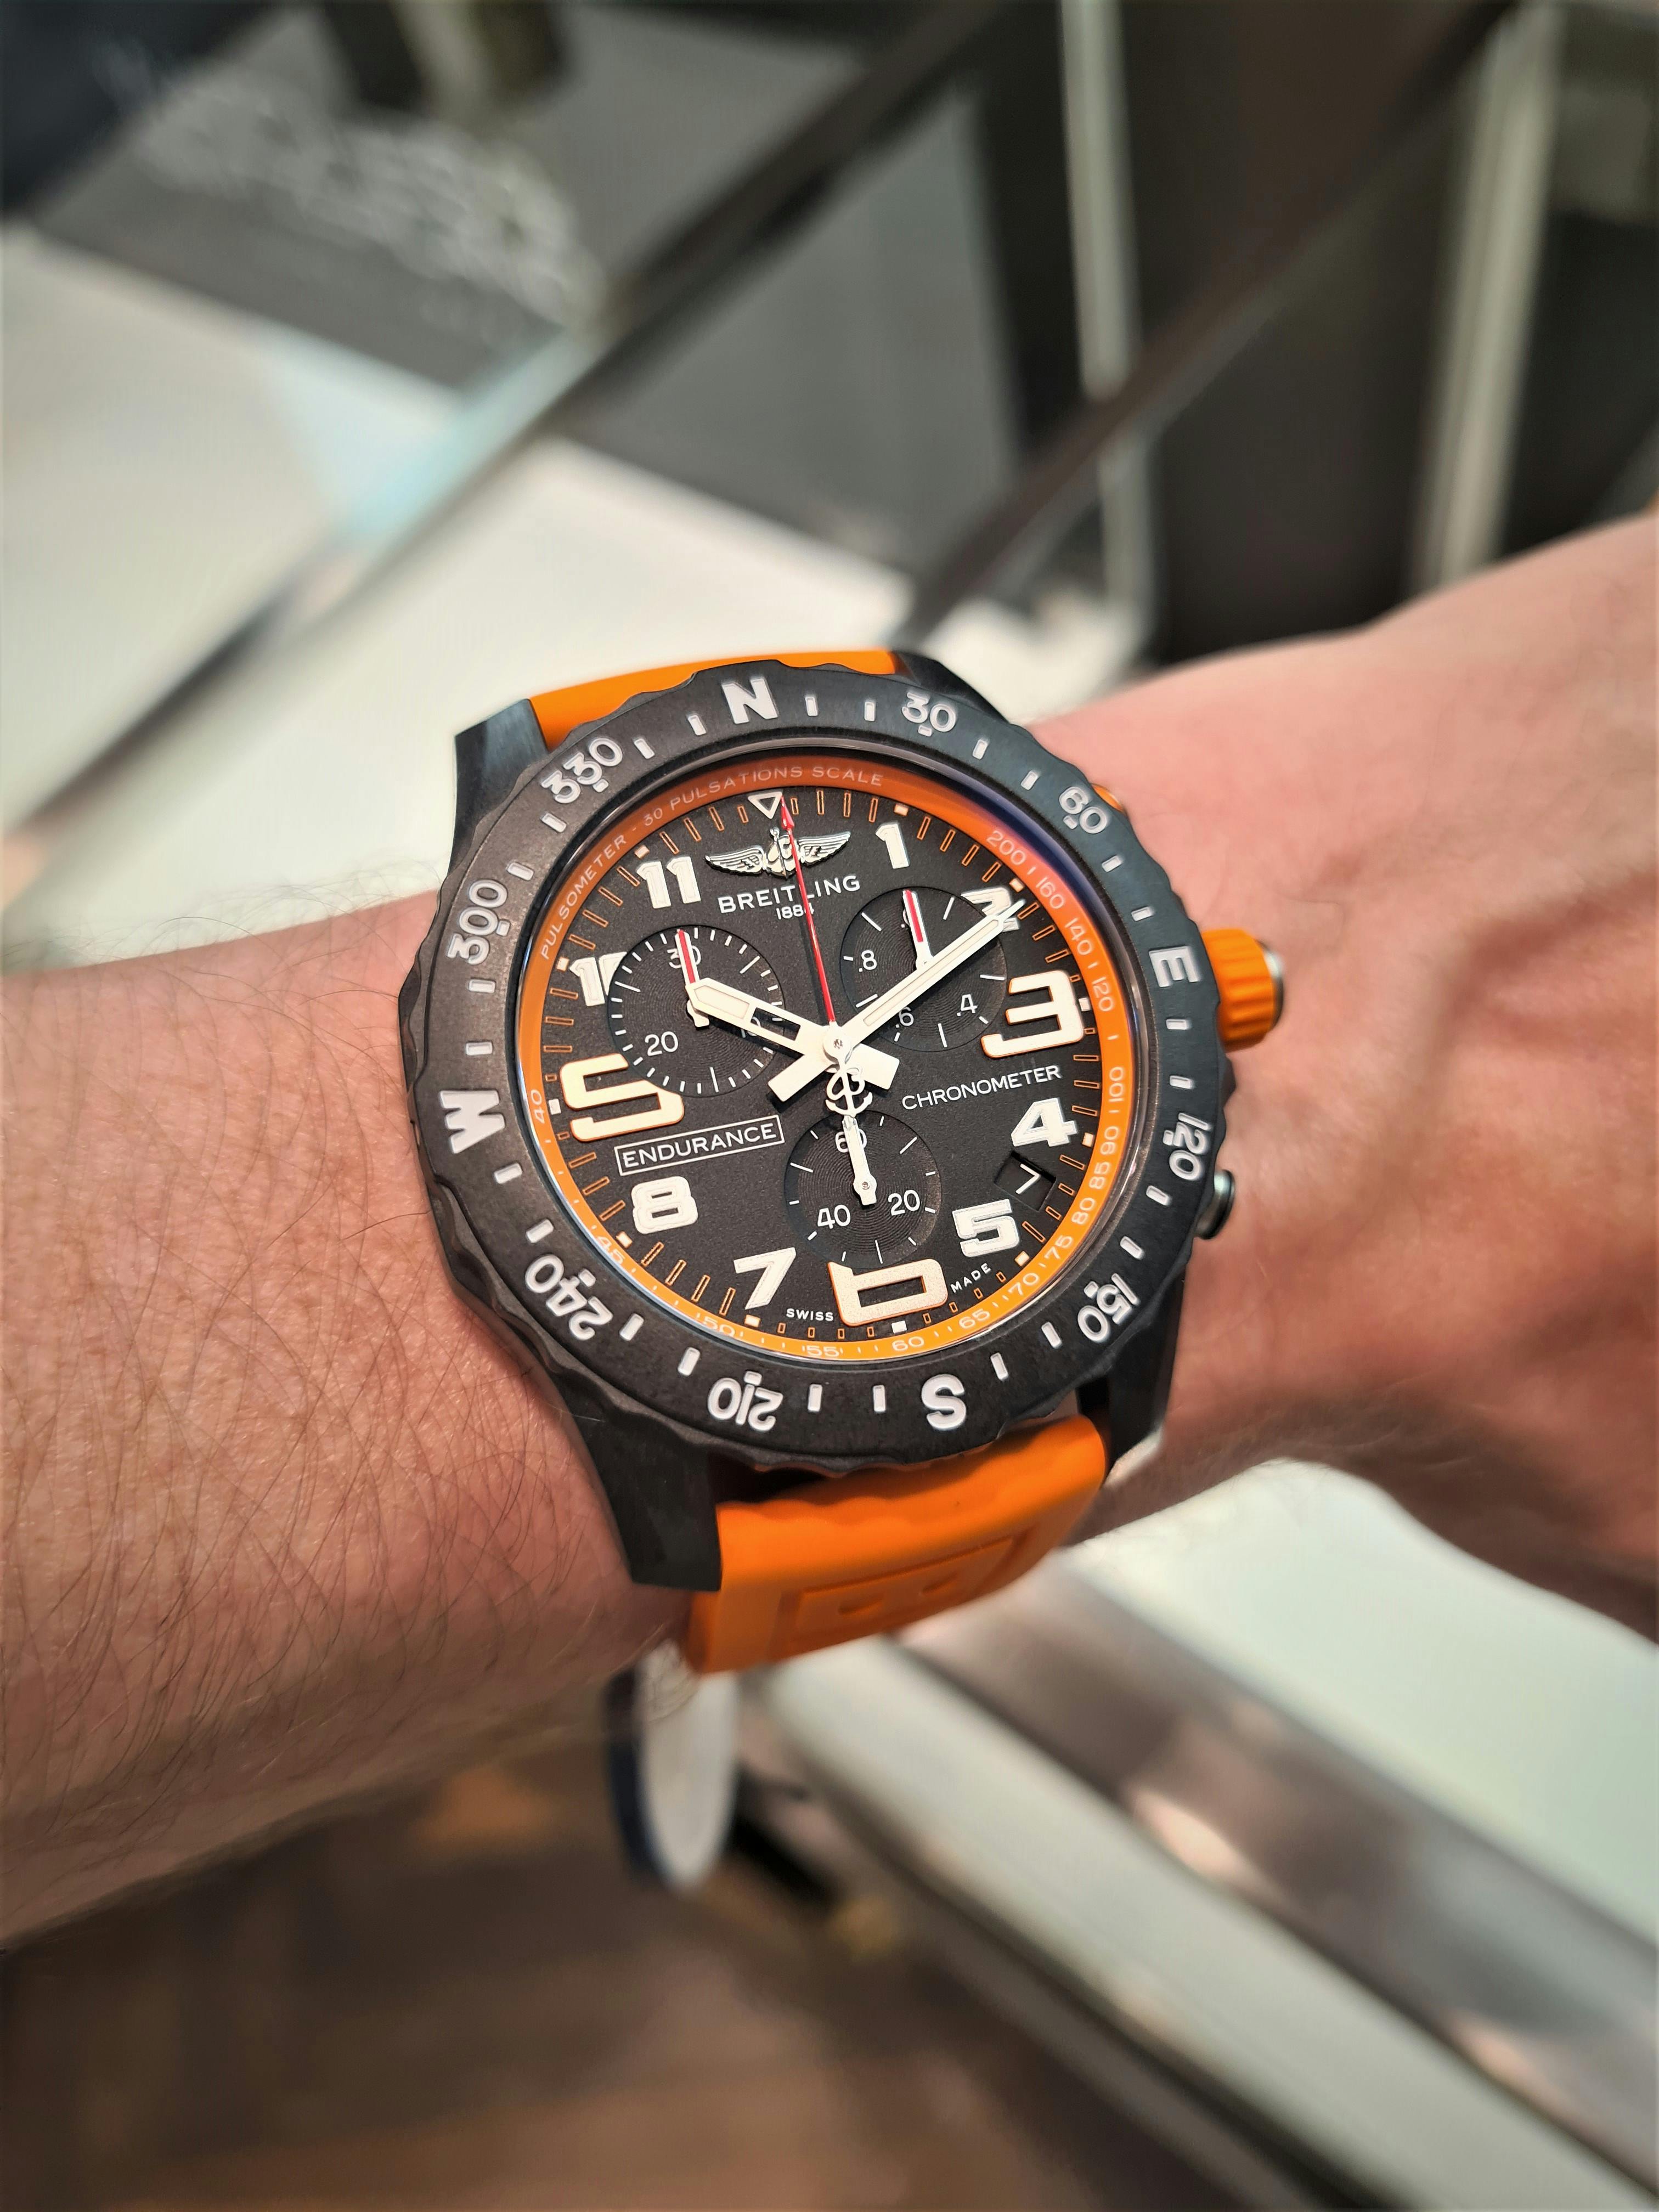 Grey and orange Breitling watch with large white numbers and white hands